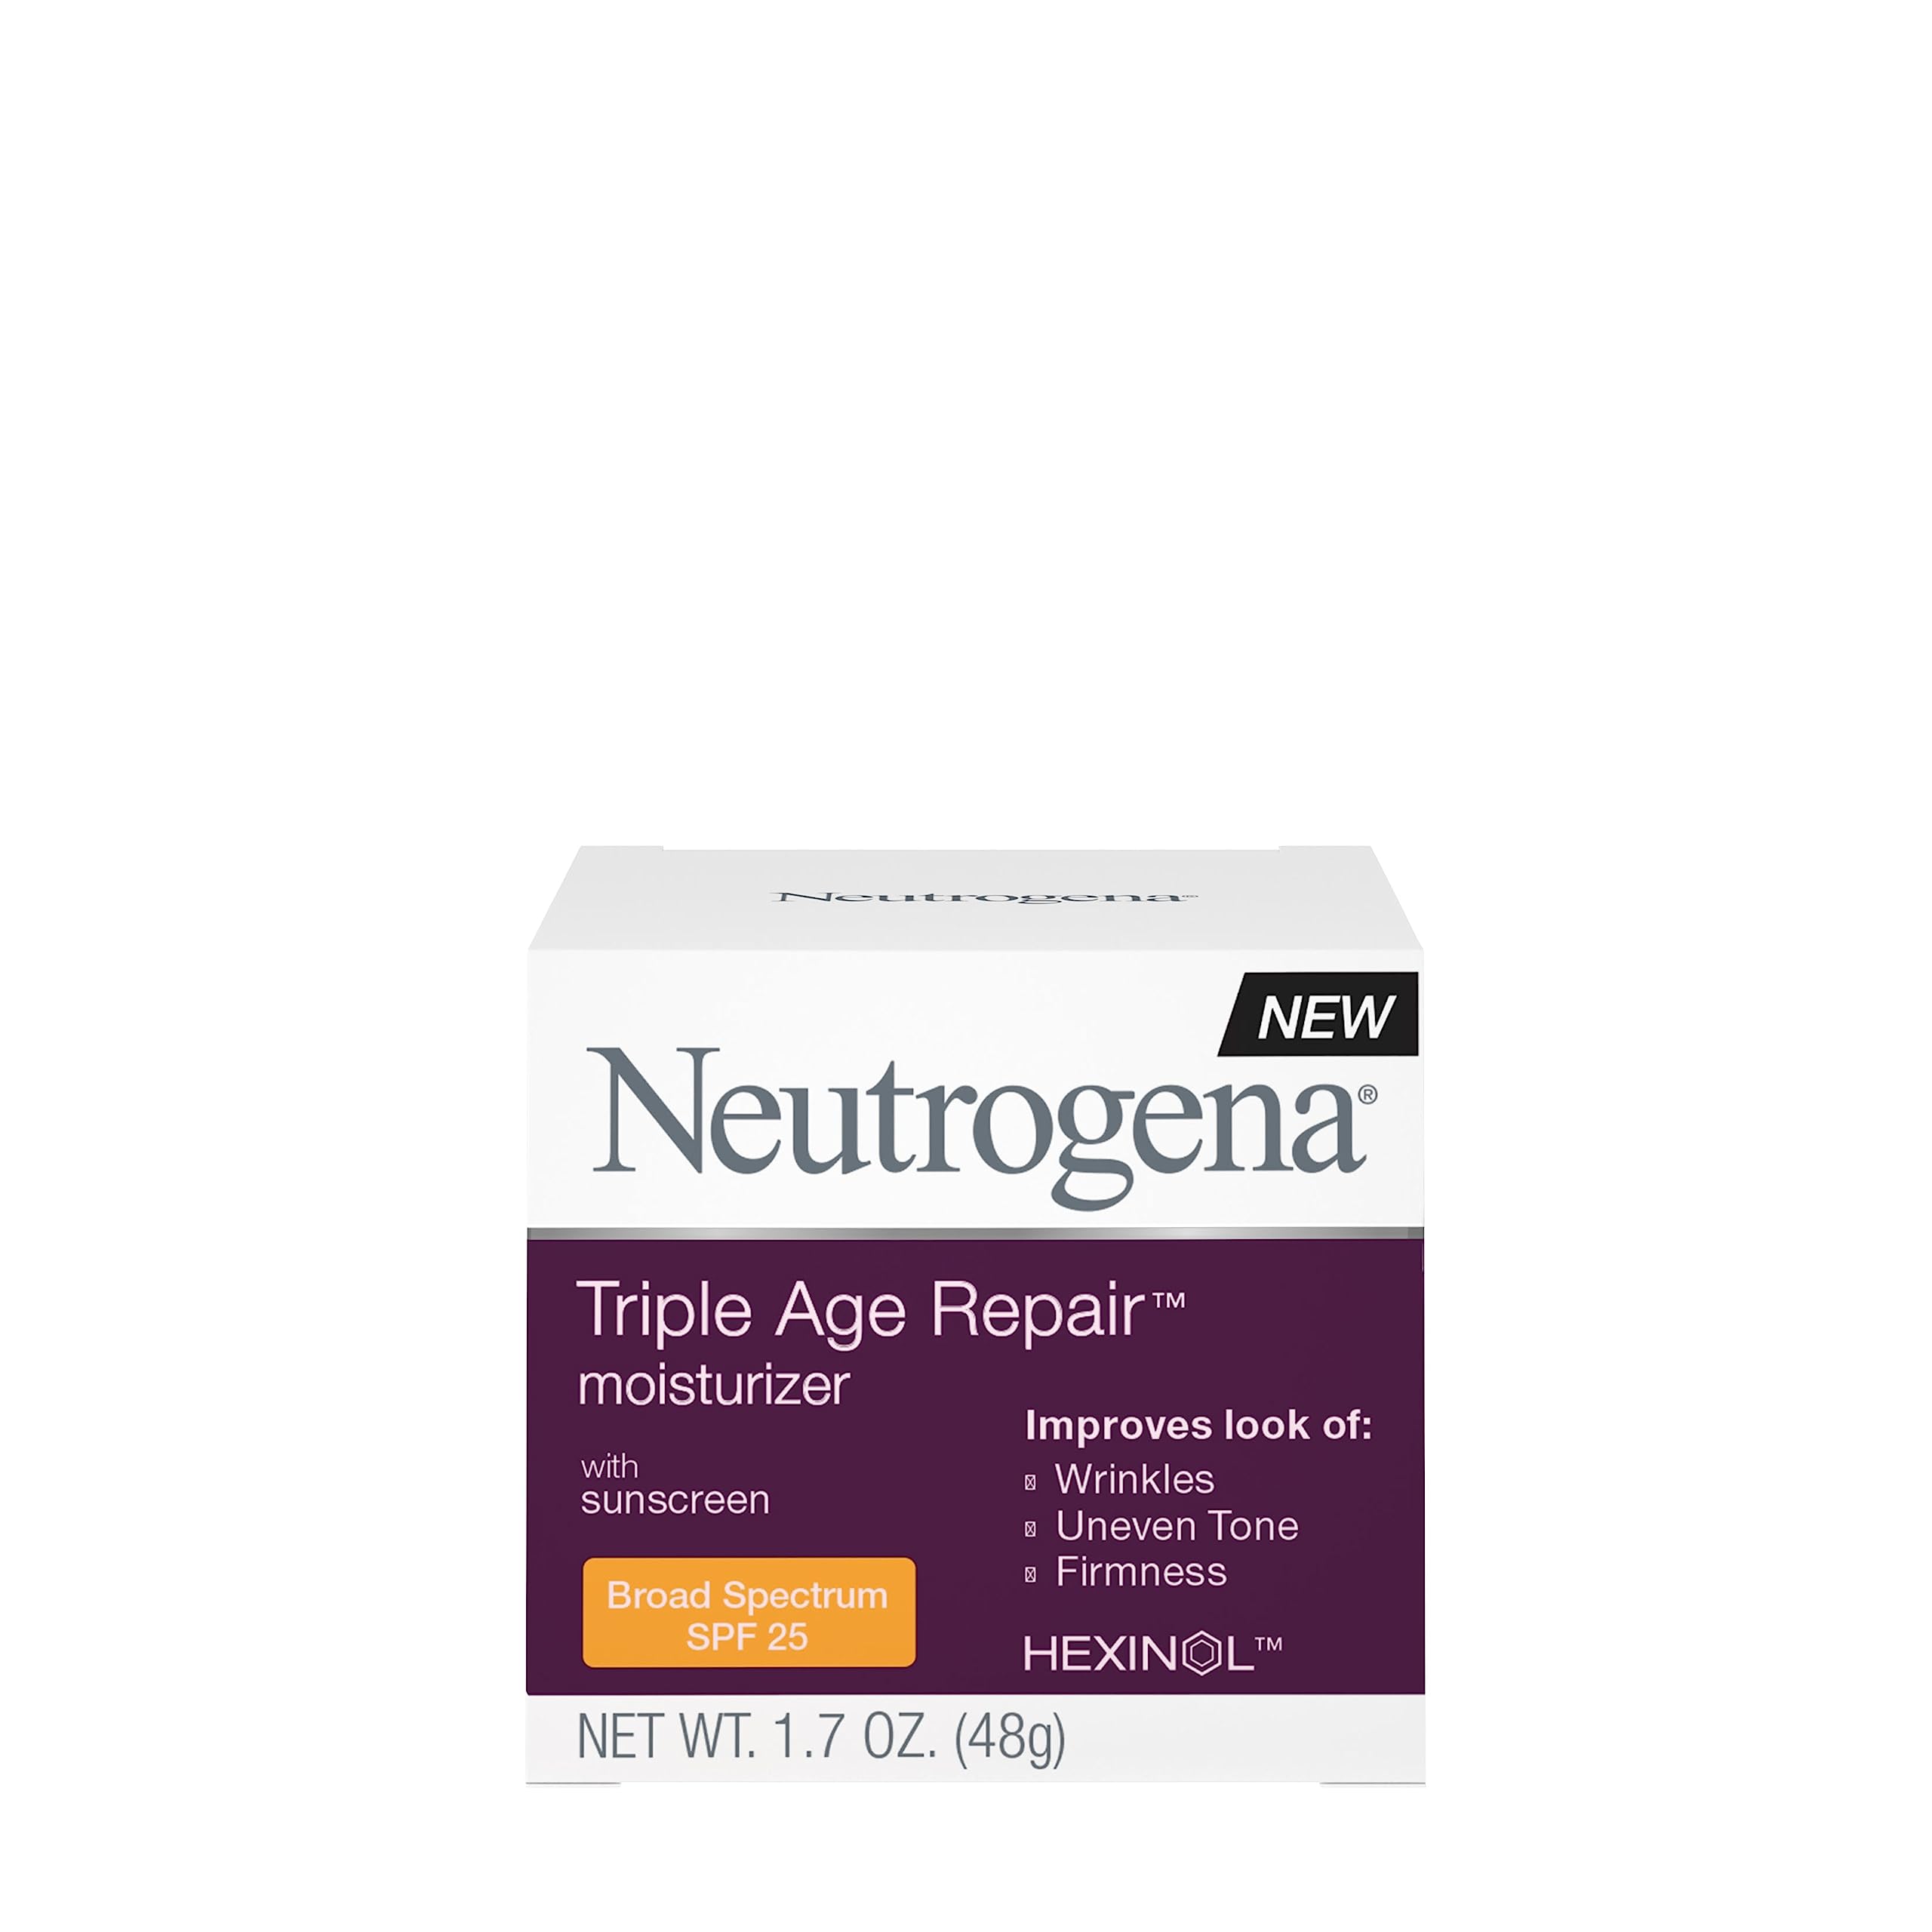 Neutrogena Triple Age Repair Anti-Aging Daily Facial Moisturizer with SPF 25 Sunscreen & Vitamin c, Firming Anti-Wrinkle Face &